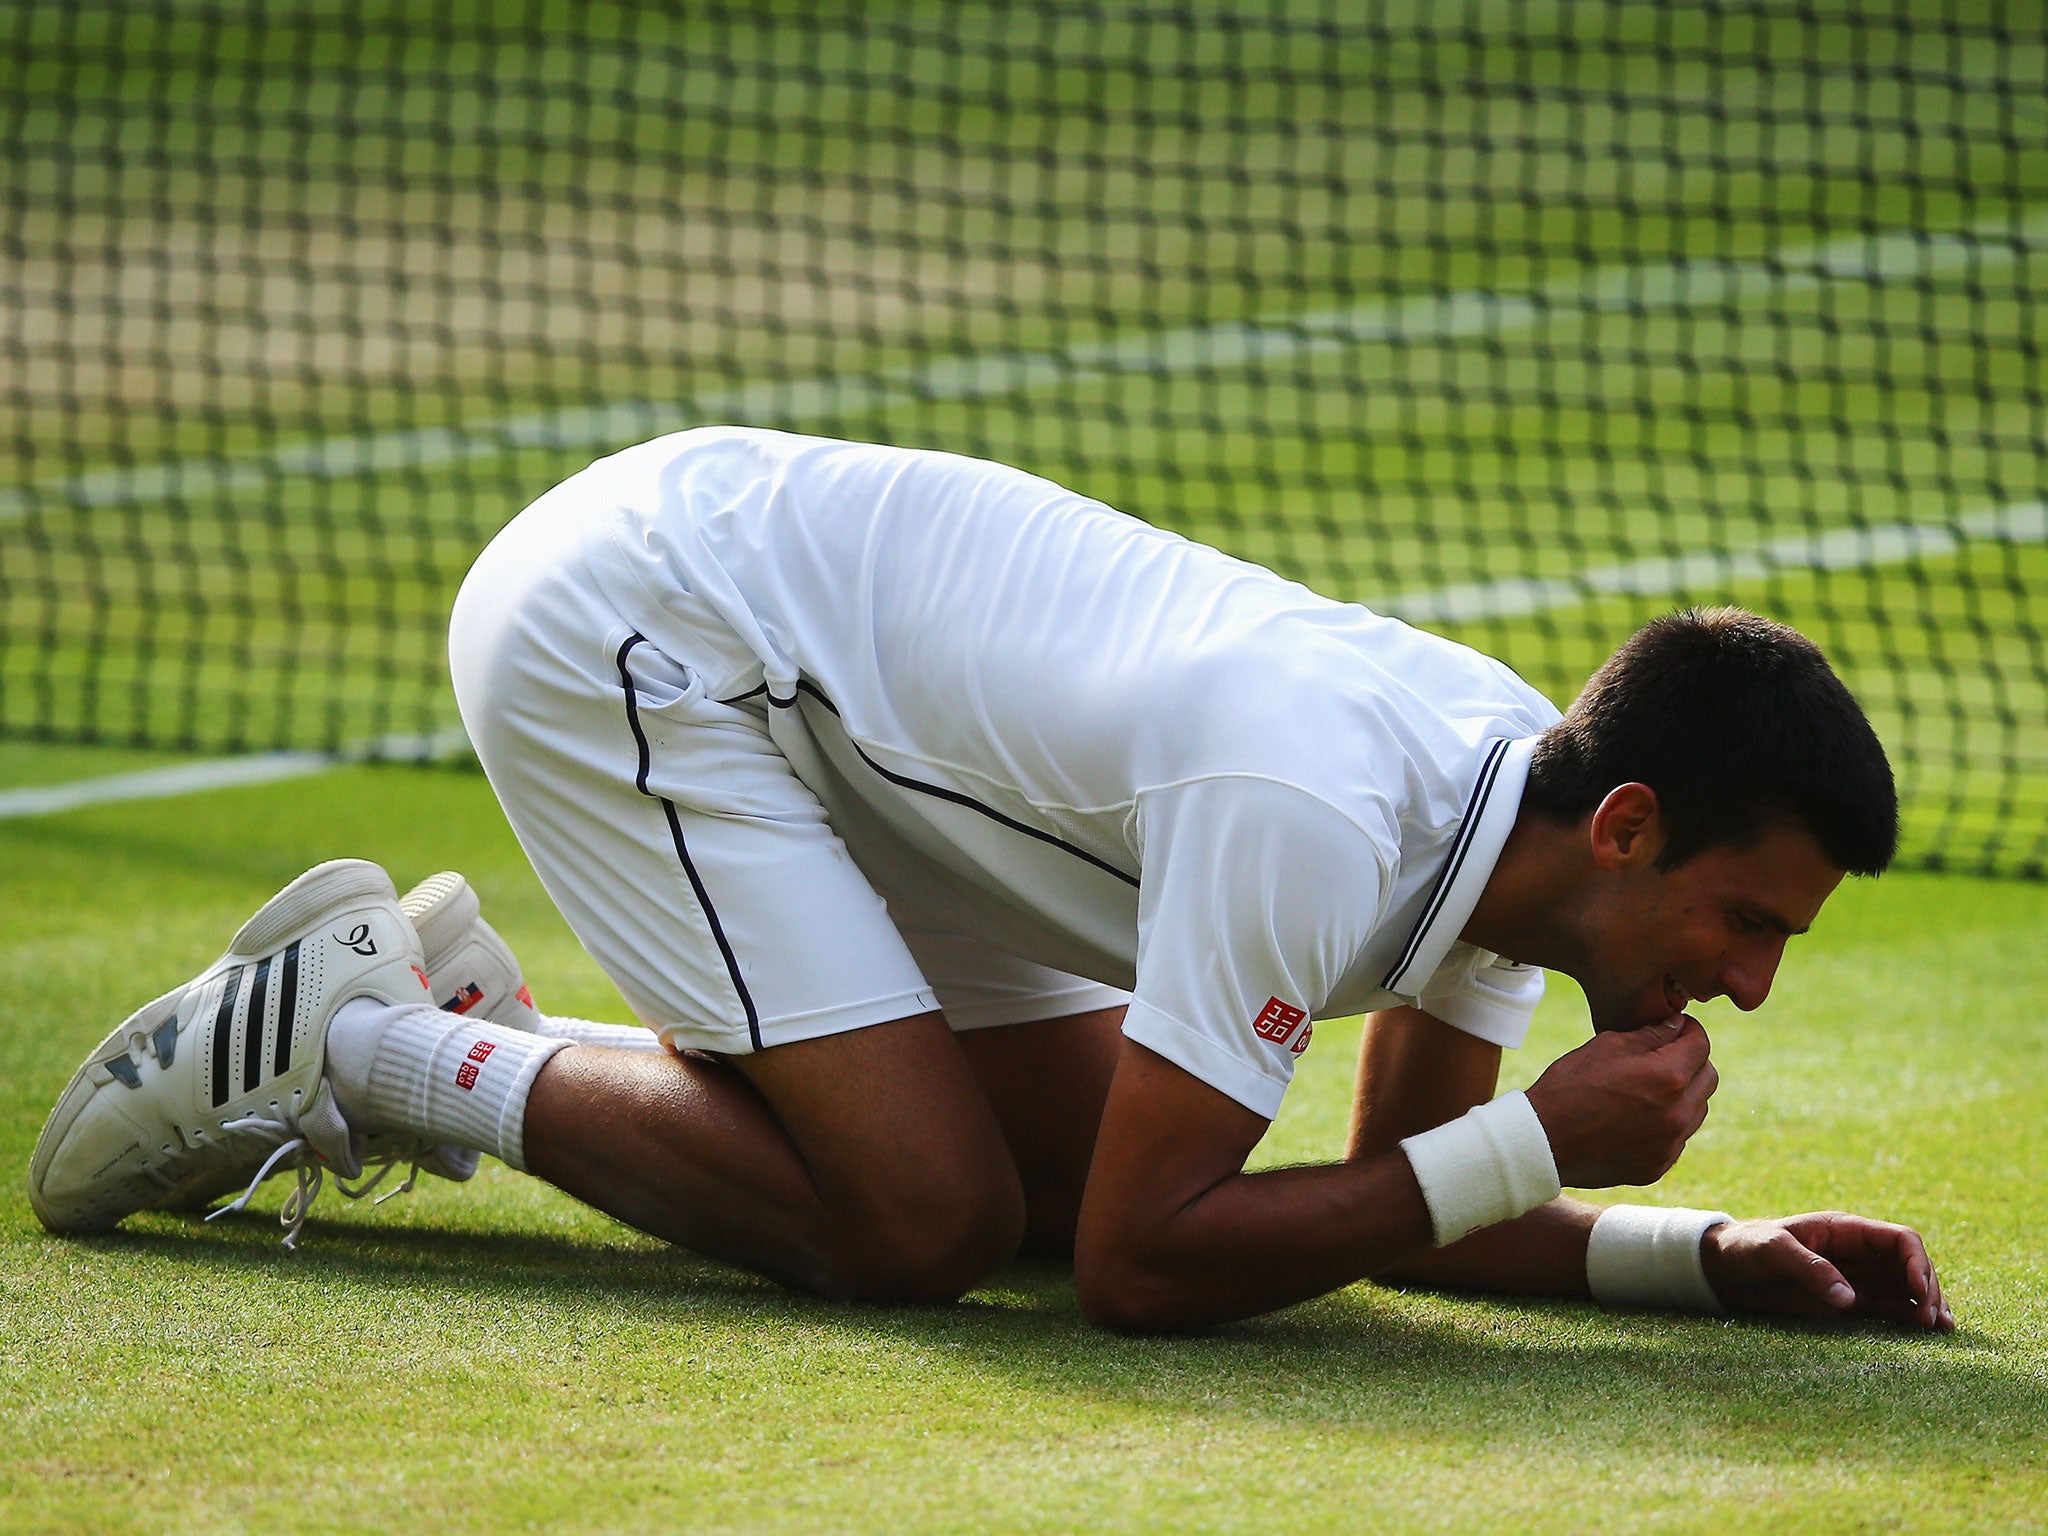 Djokovic ate the grass of Centre Court in celebration after beating Federer (Getty)